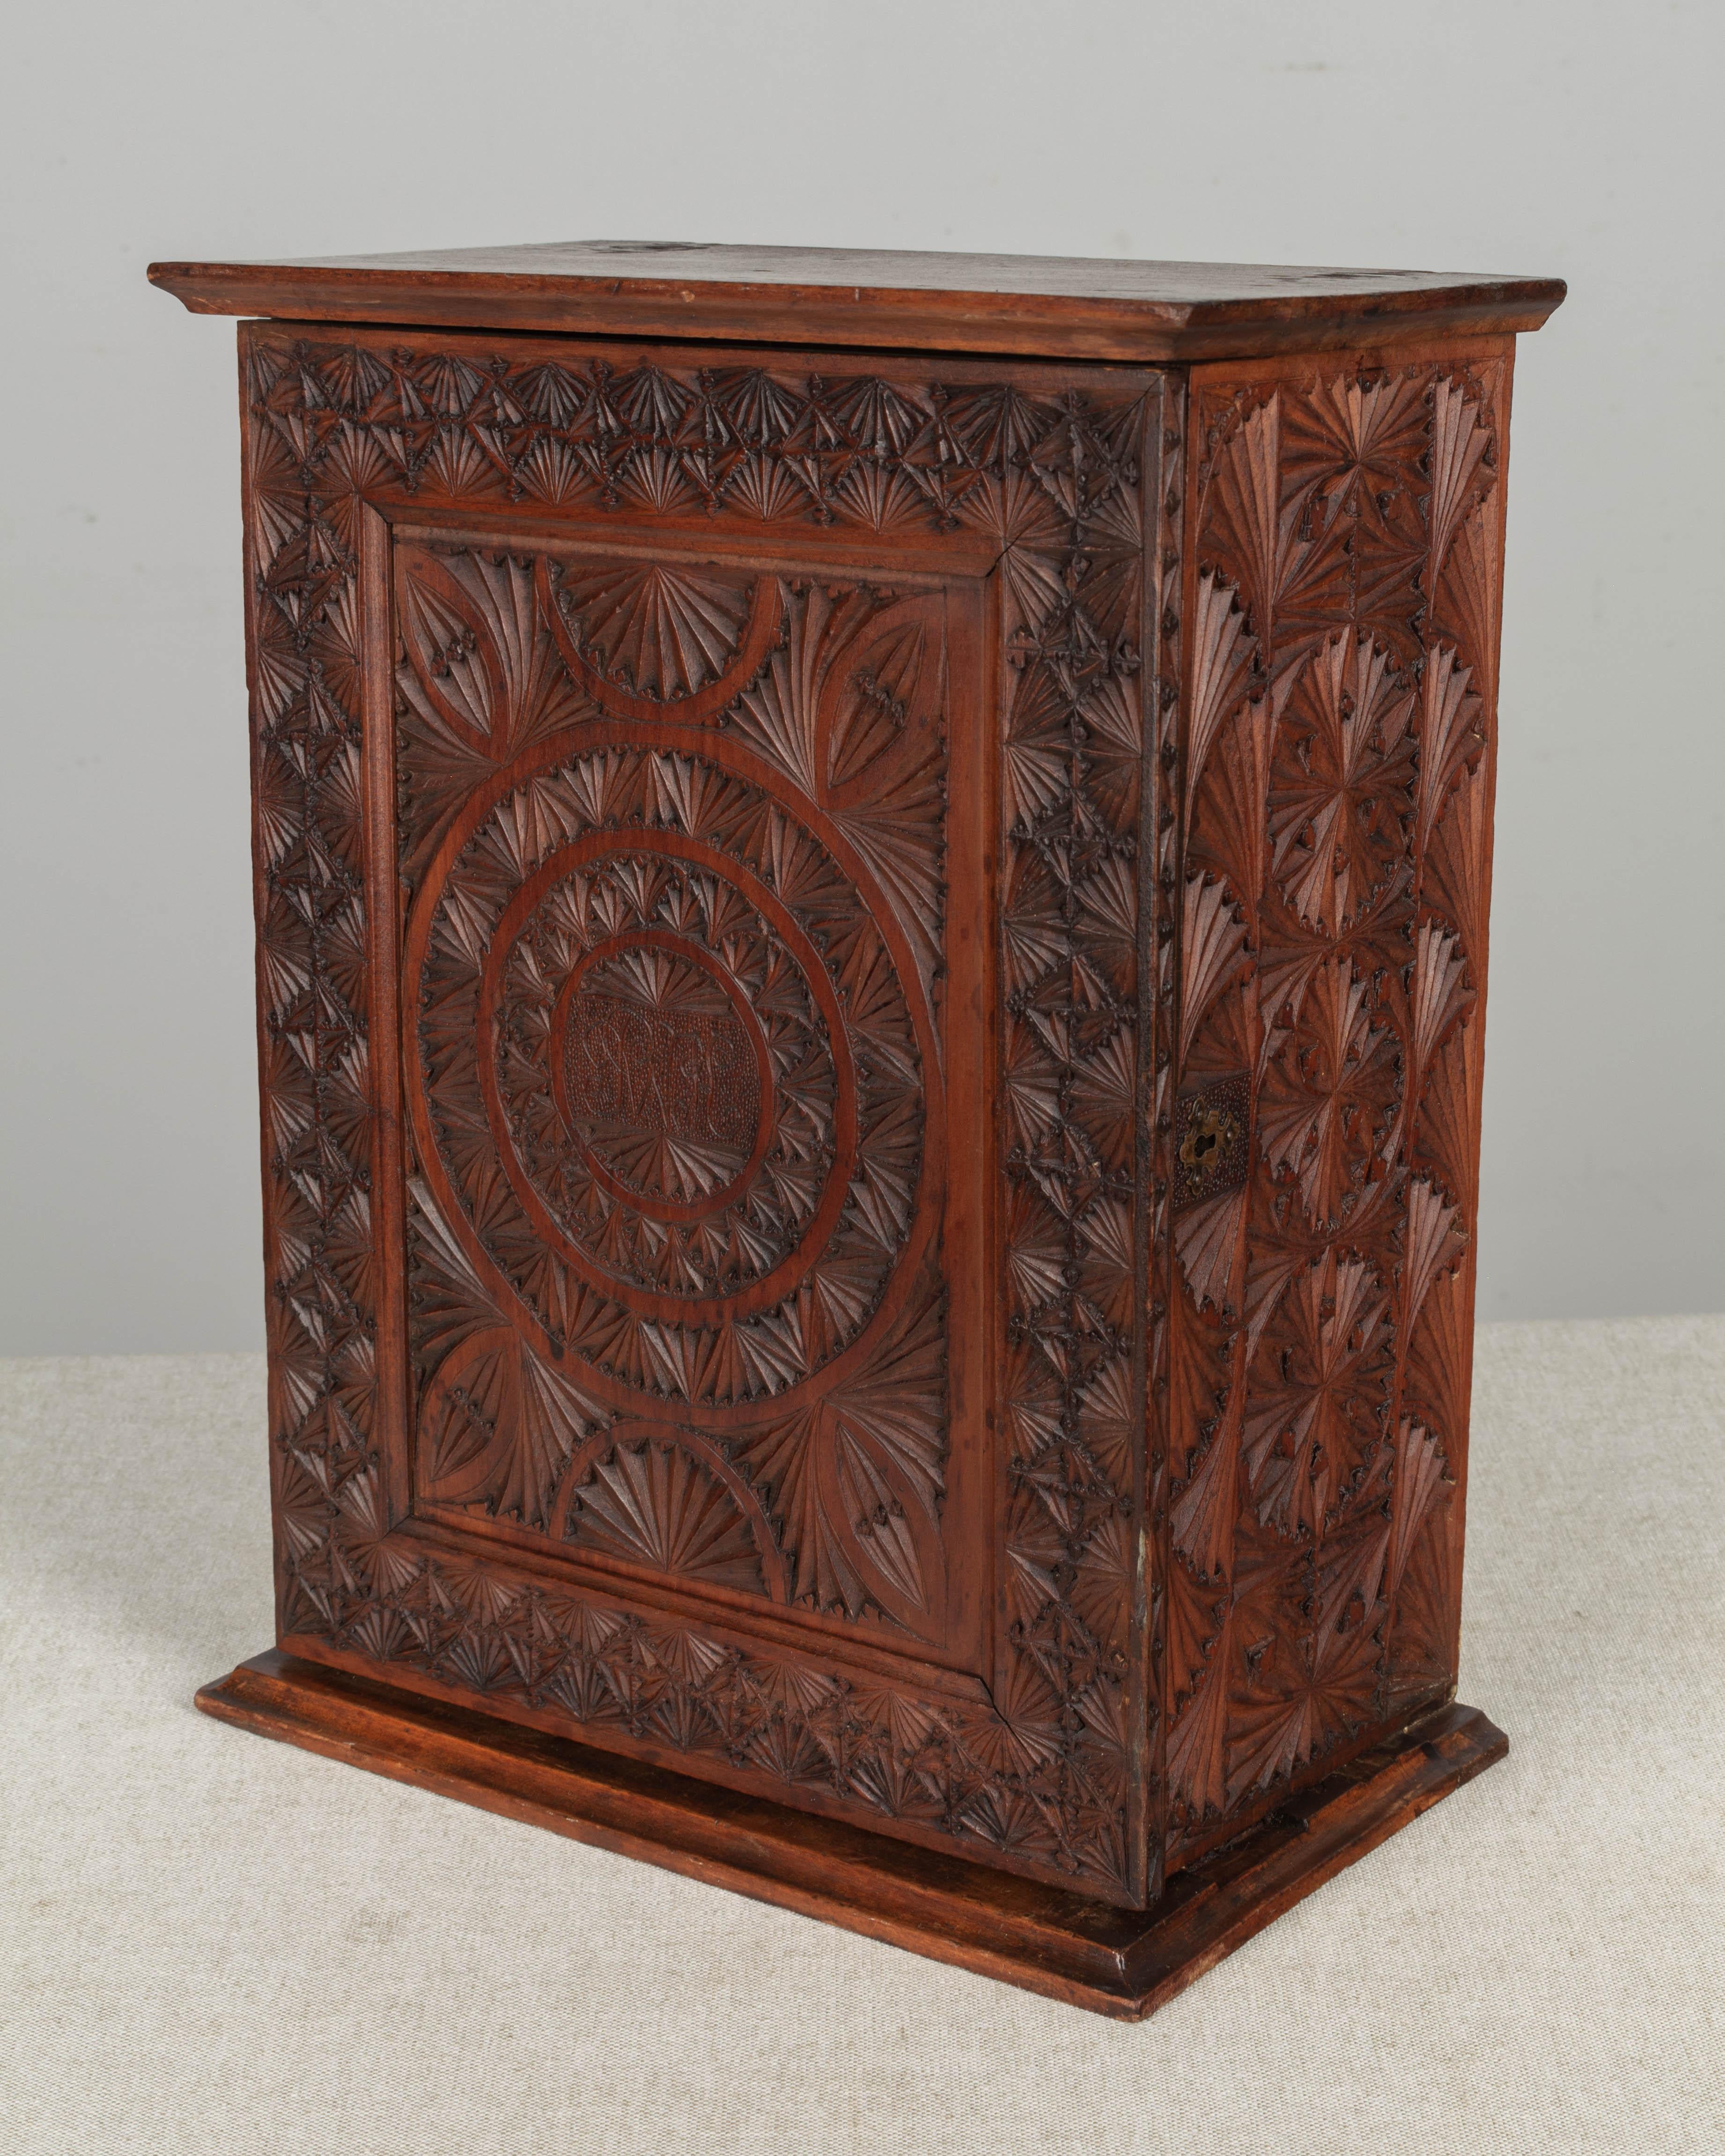 A 19th century French carved wooden box or small cabinet, perhaps for spices, with hinged door, opening to an interior shelf and two small drawers. Intricate geometric carving with monogram initials in the center of the door. No key.